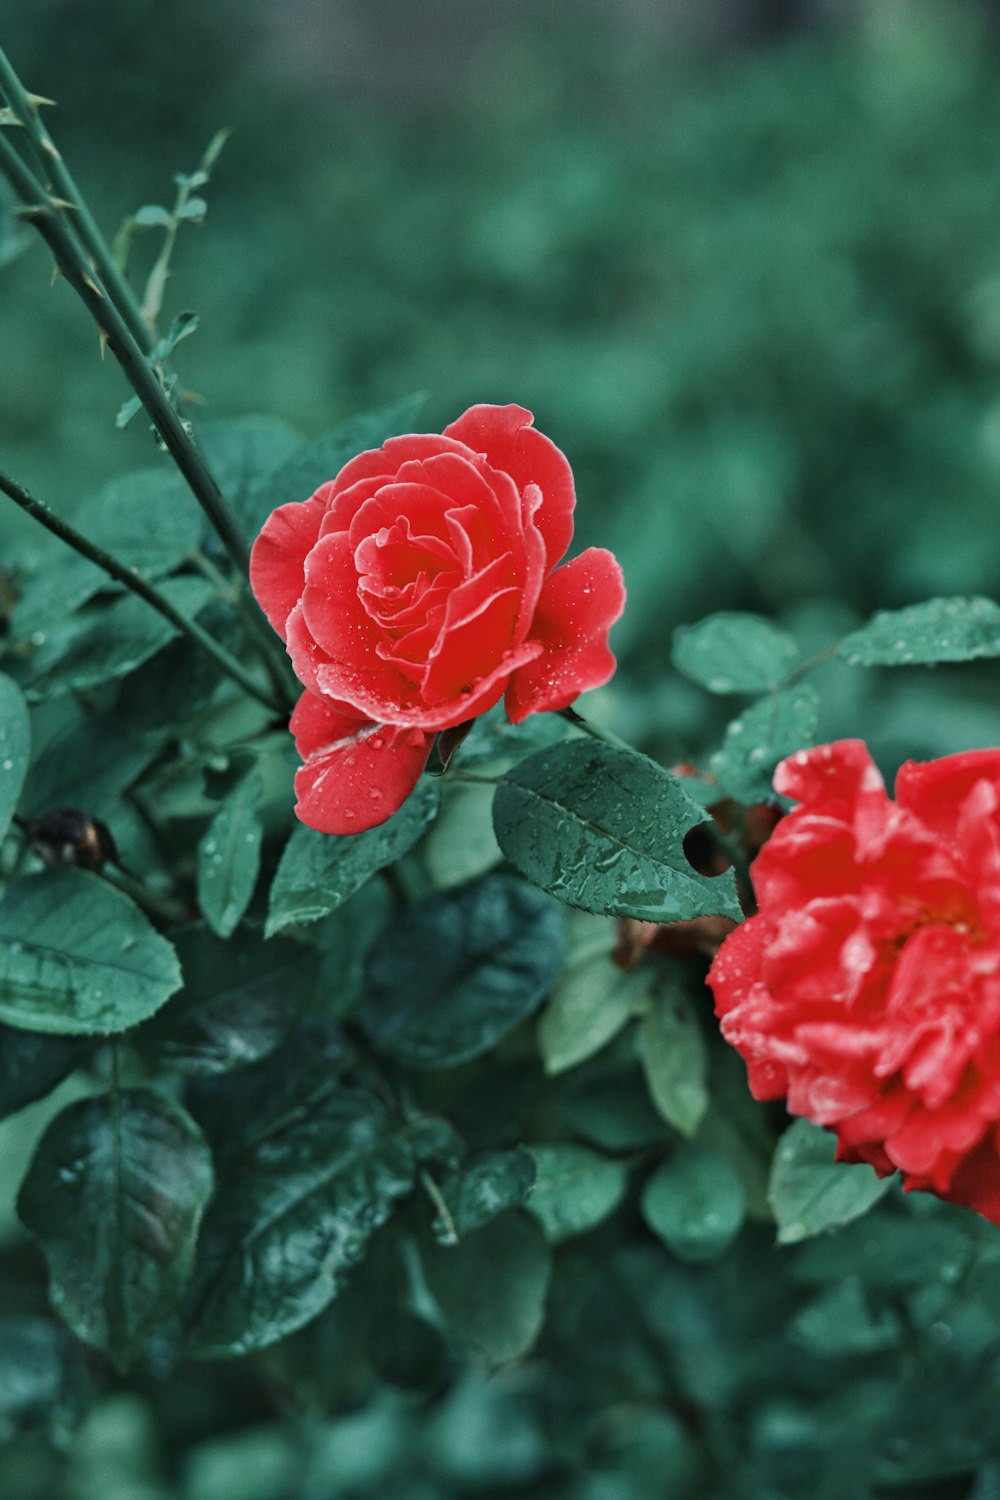 two red flowers with green leaves in the background